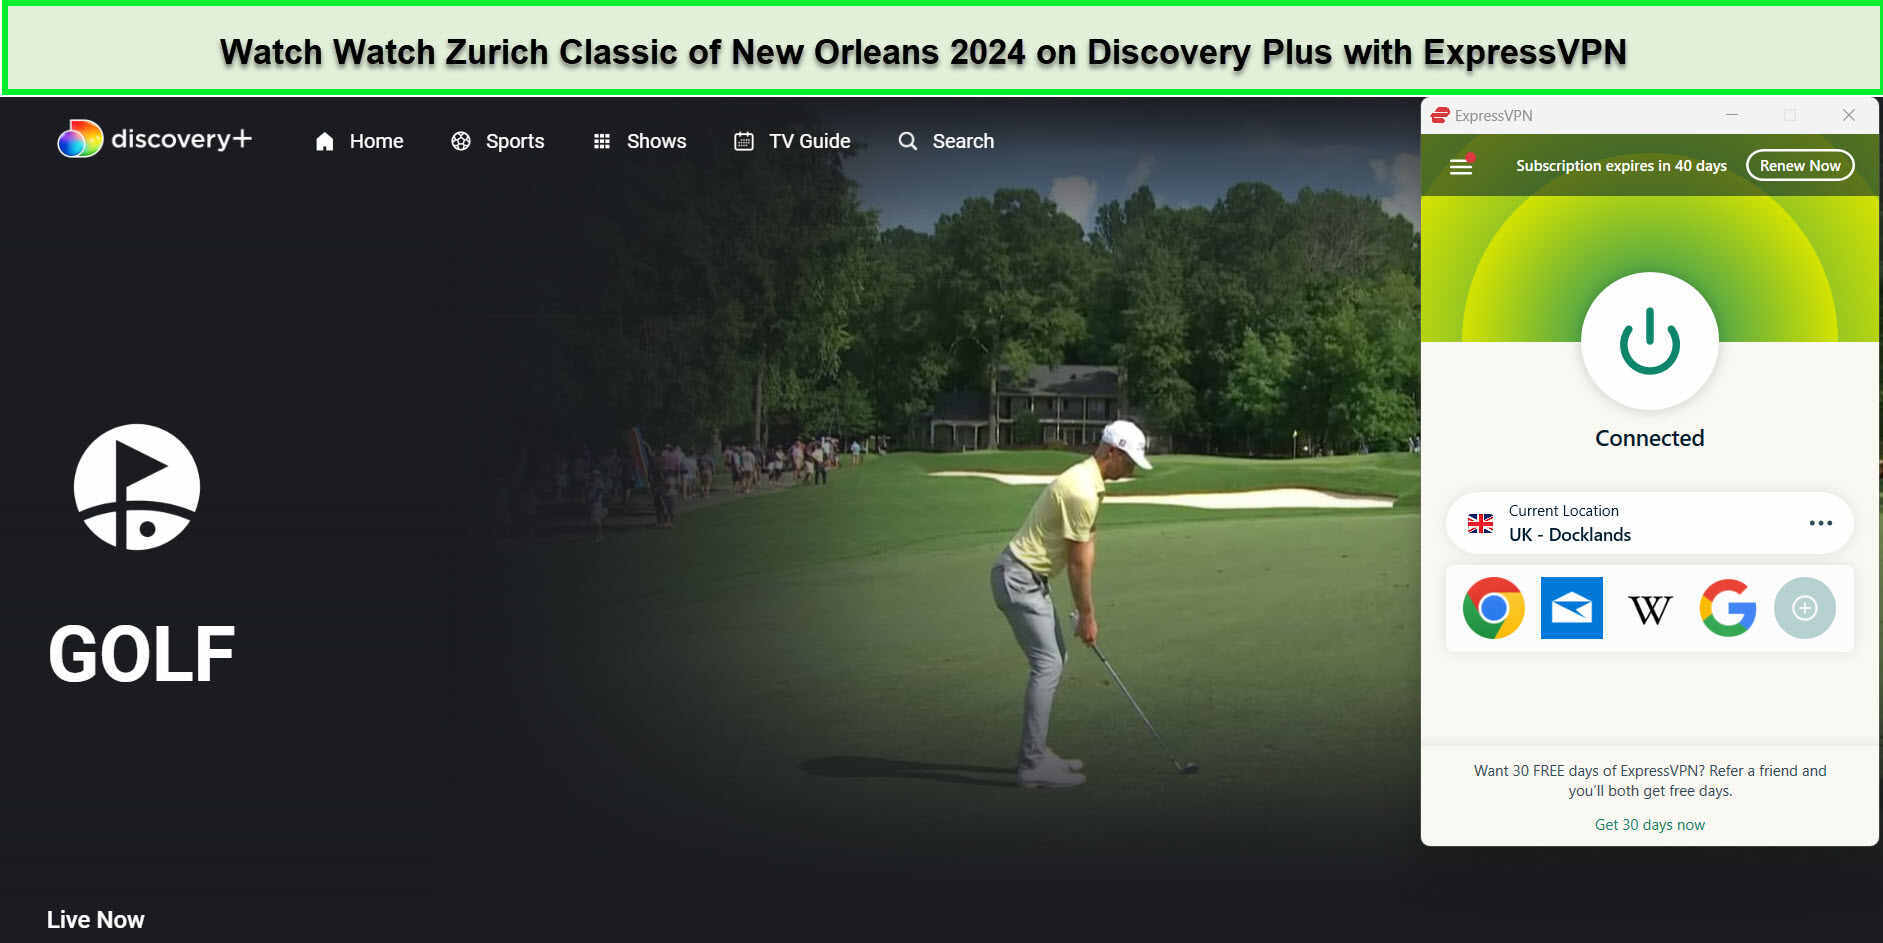 Watch-Zurich-Classic-of-New-Orleans-2024-in-Australia-On-Discovery-Plus-with-ExpressVPN